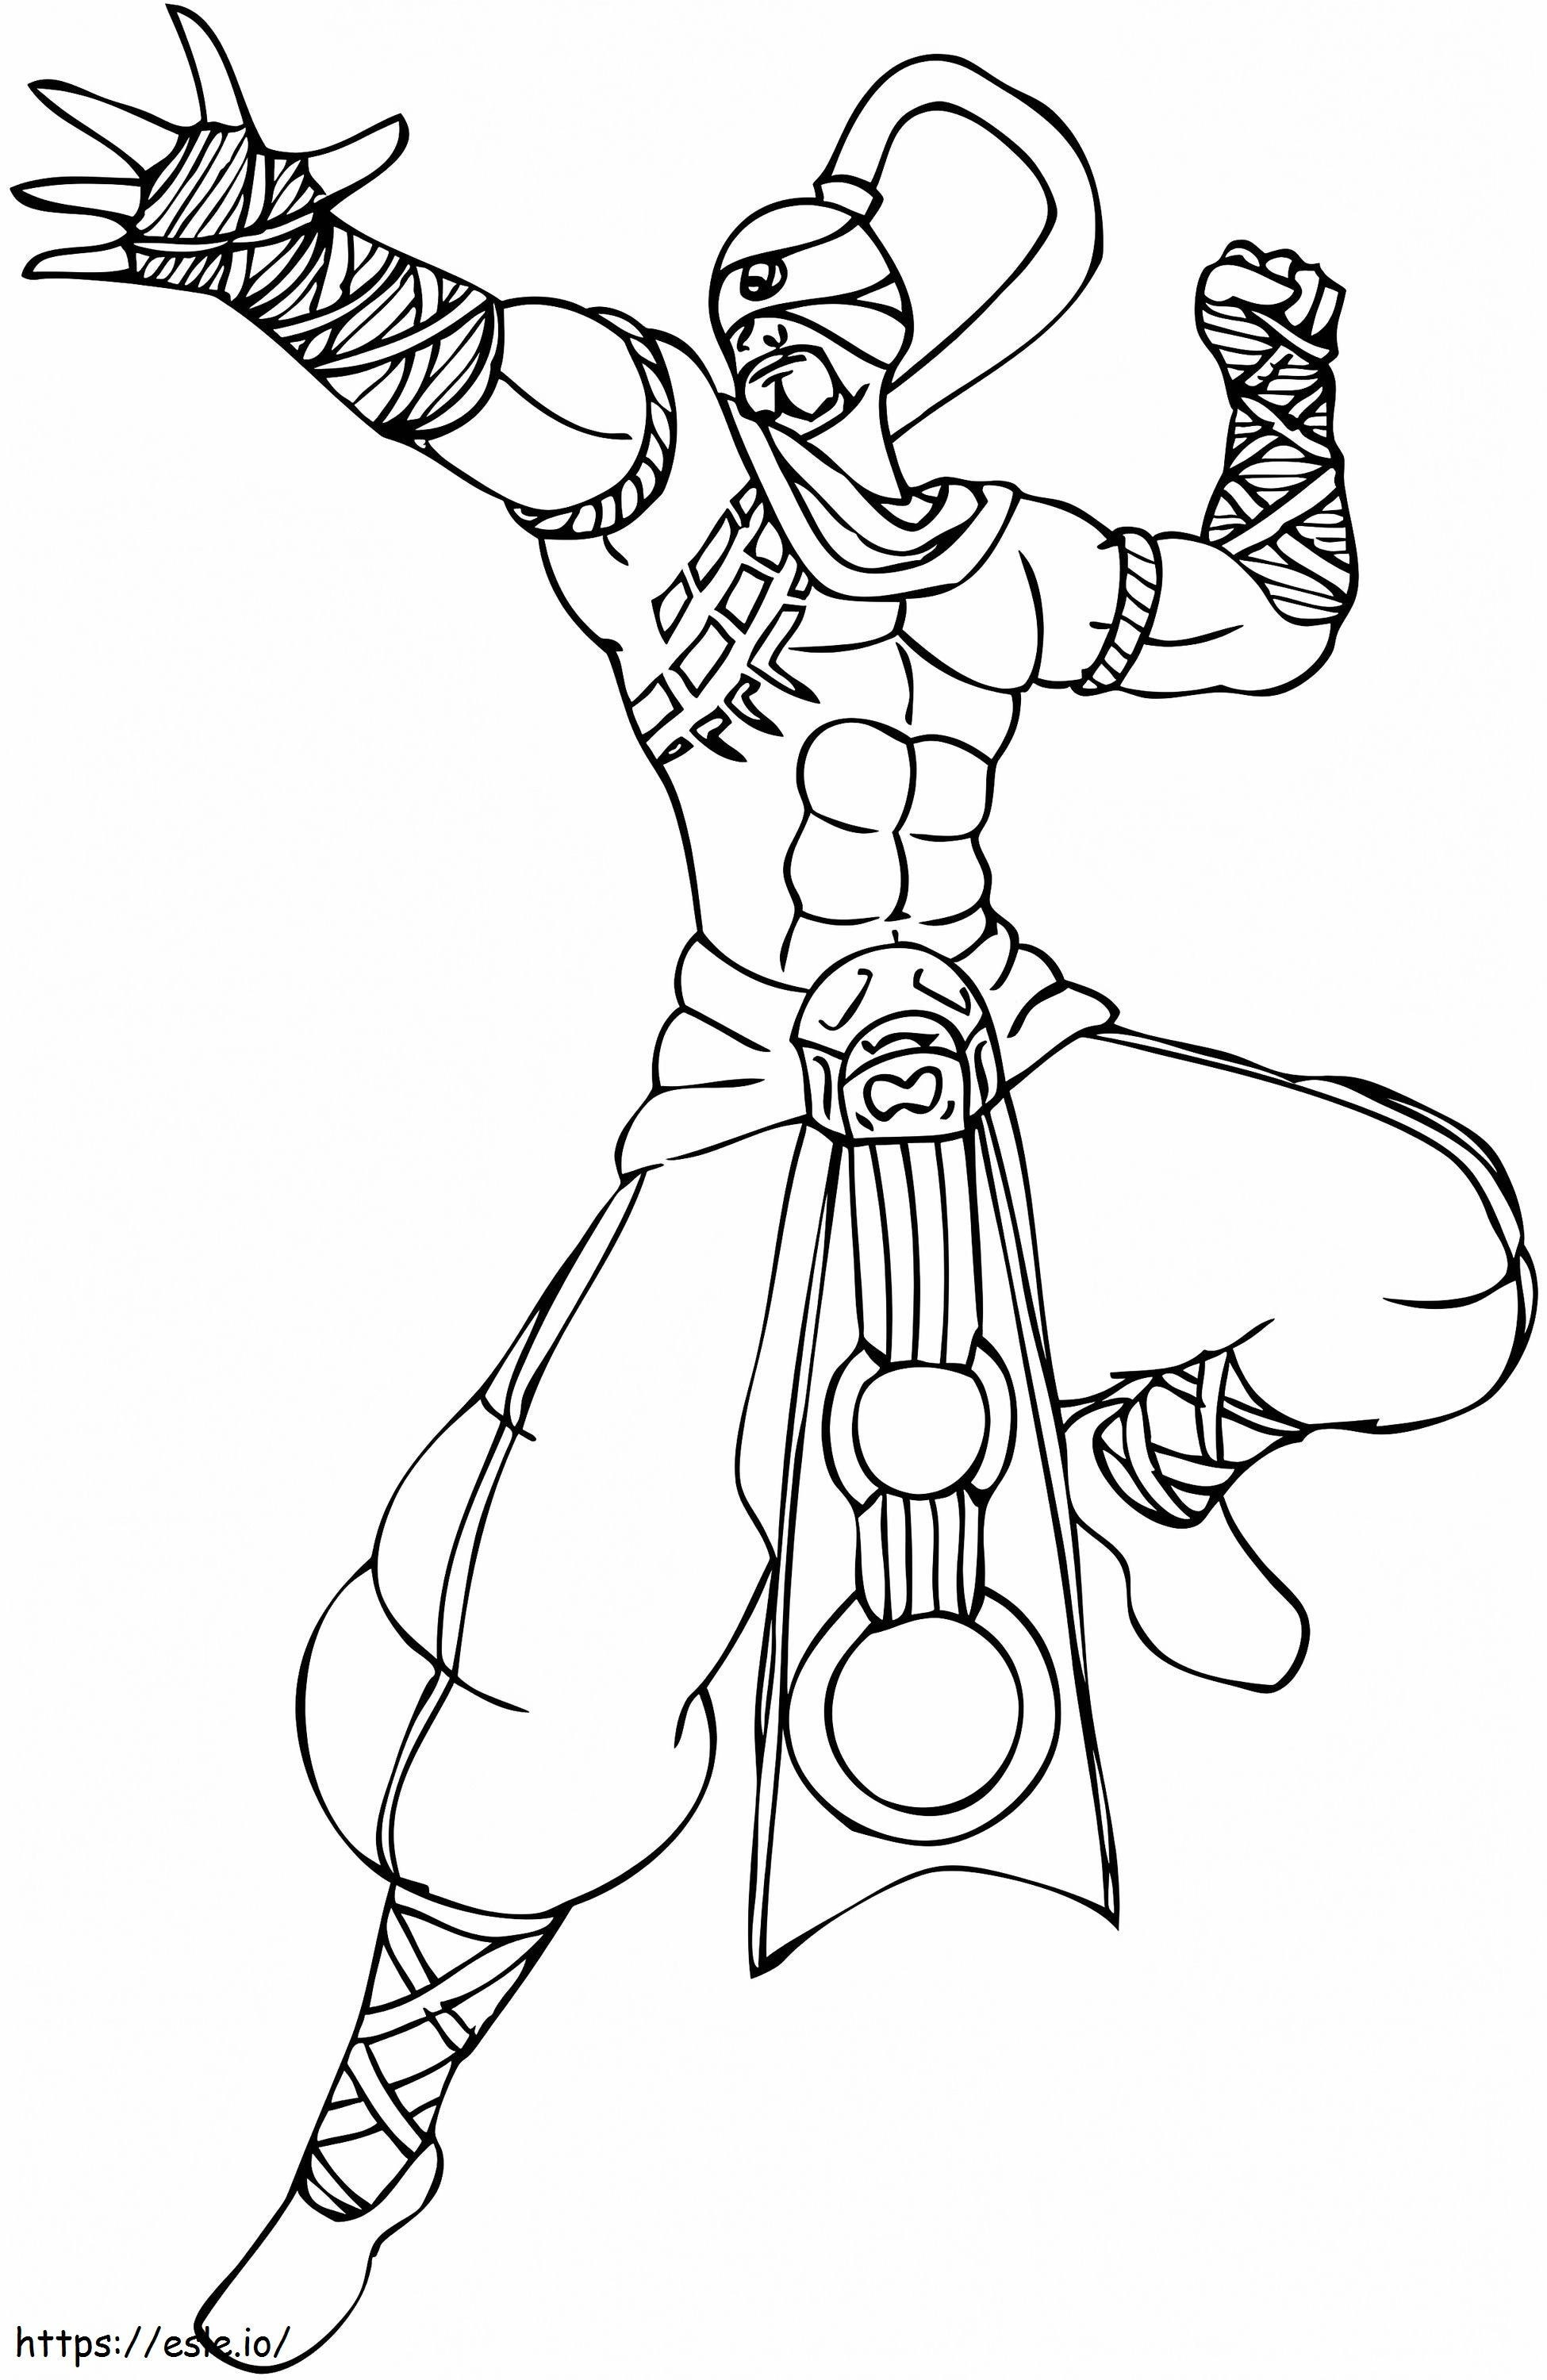 1561347110 Lee Son A4 coloring page